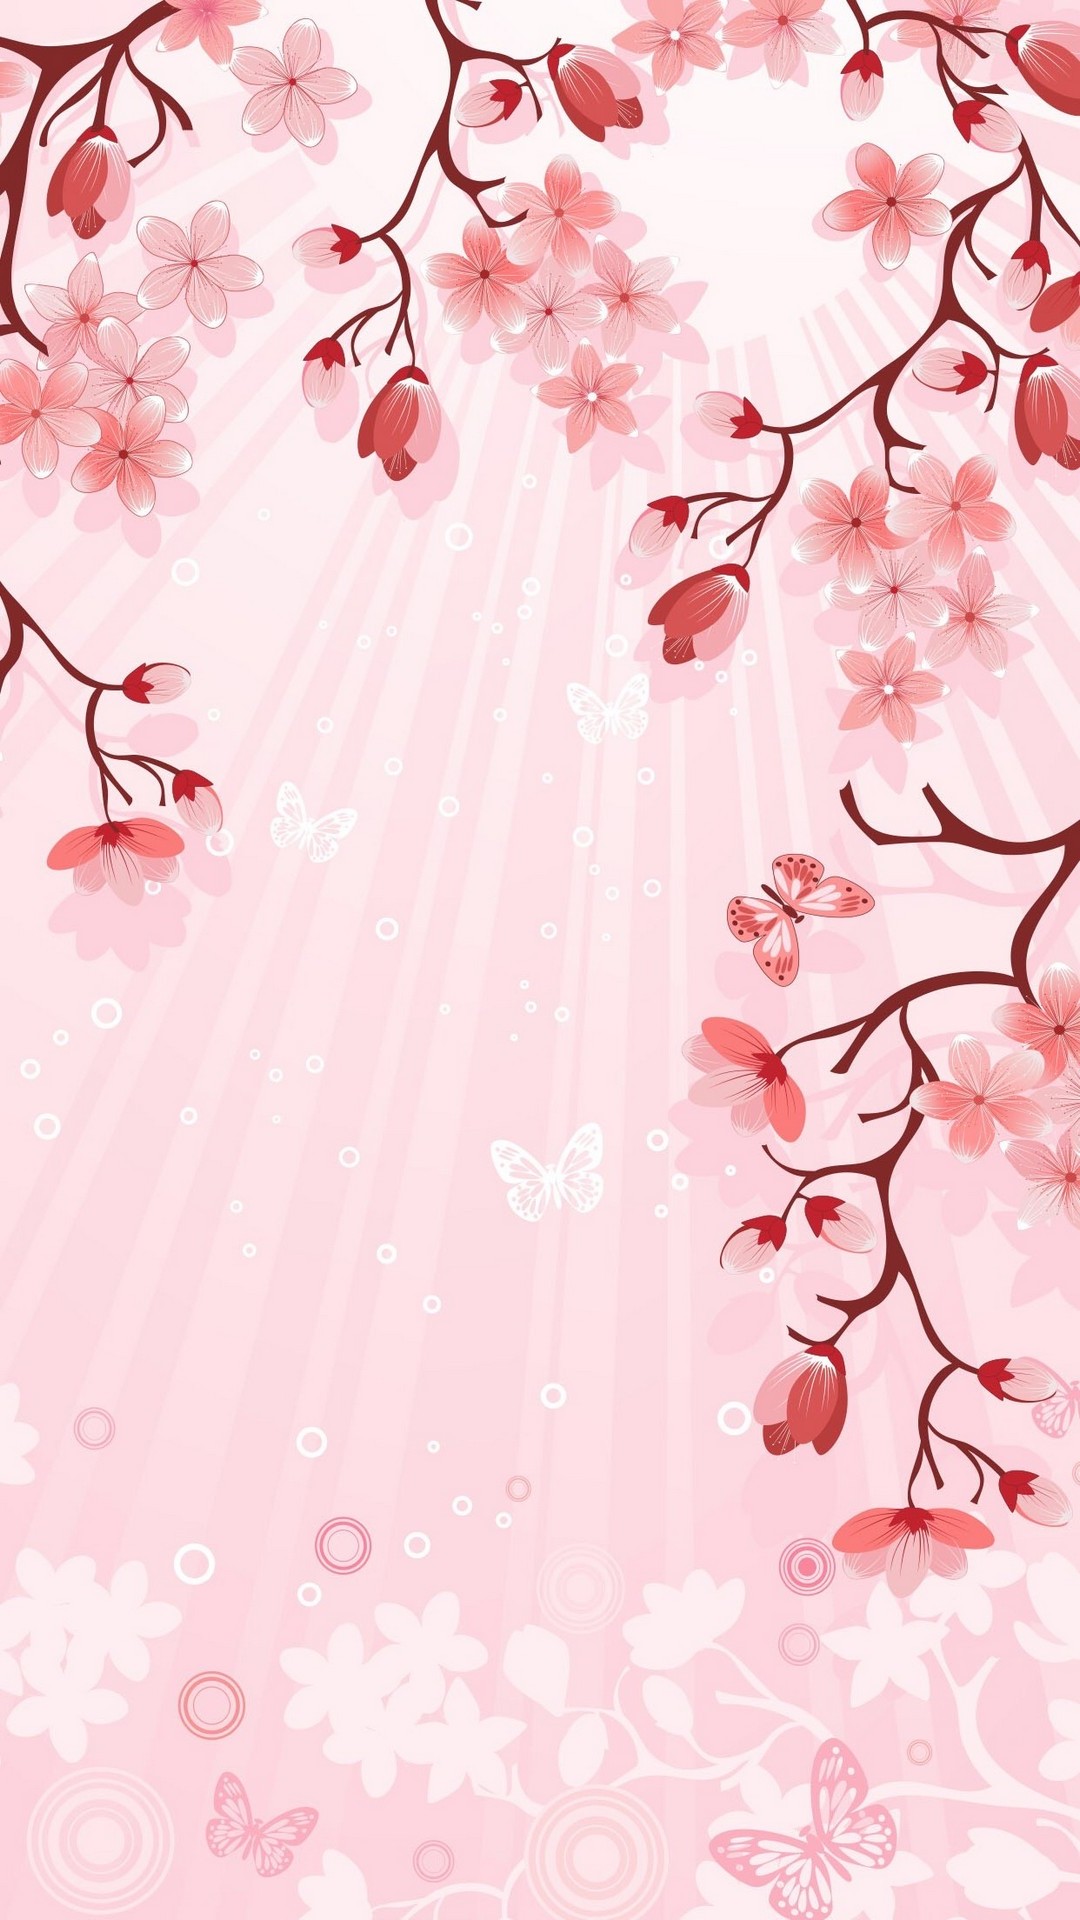 Pink Flower Wallpaper Animated | 2021 Cute Wallpapers